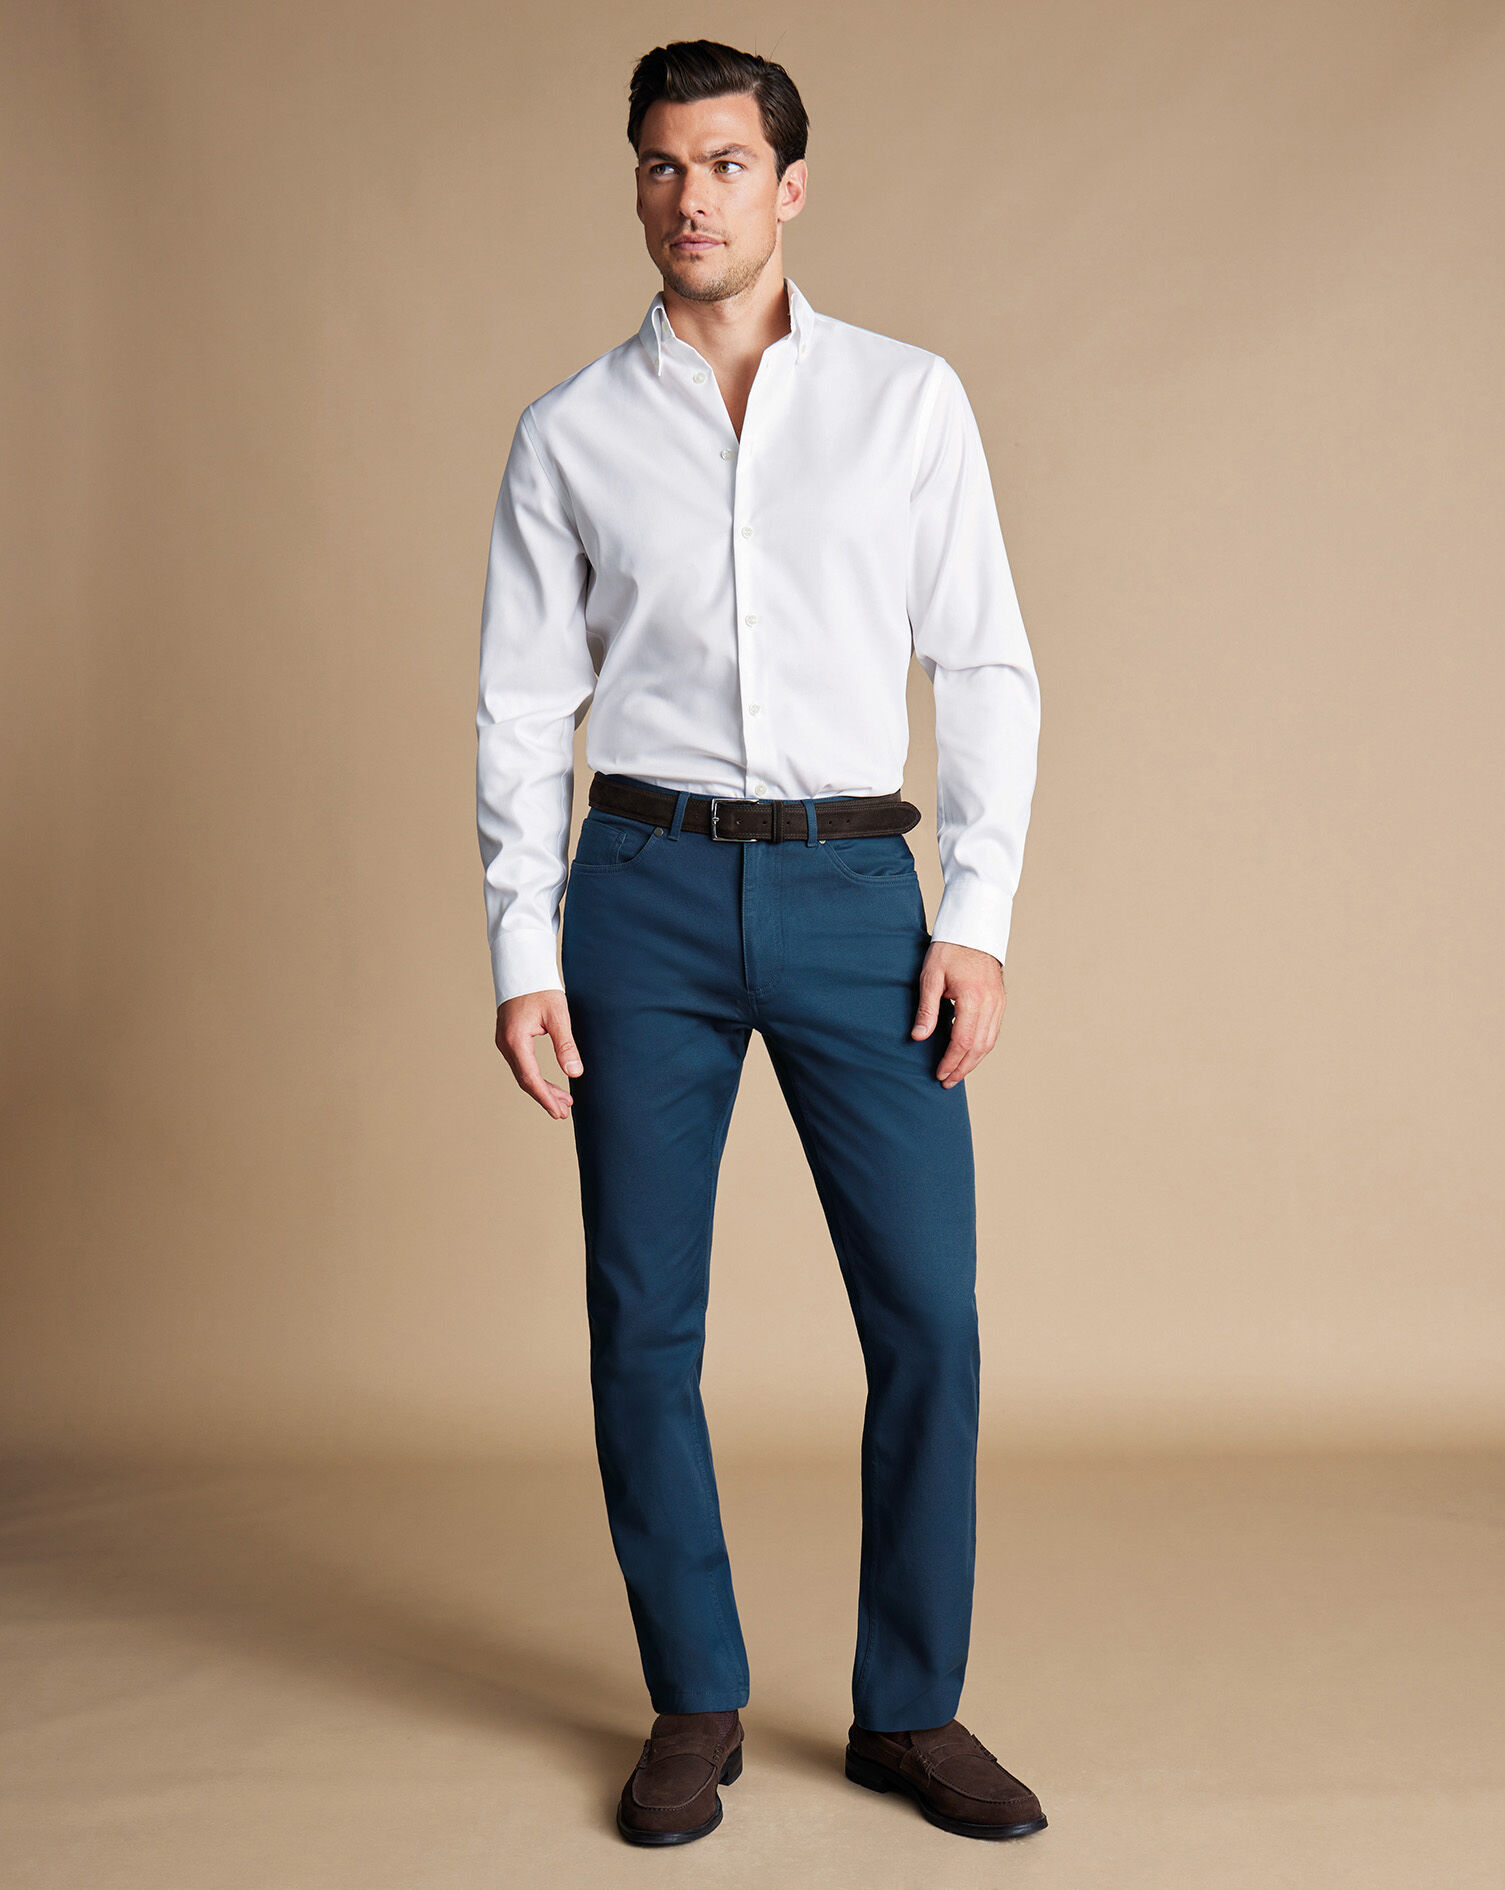 Smart Casual Men's Trousers including Cords and Walking Trousers